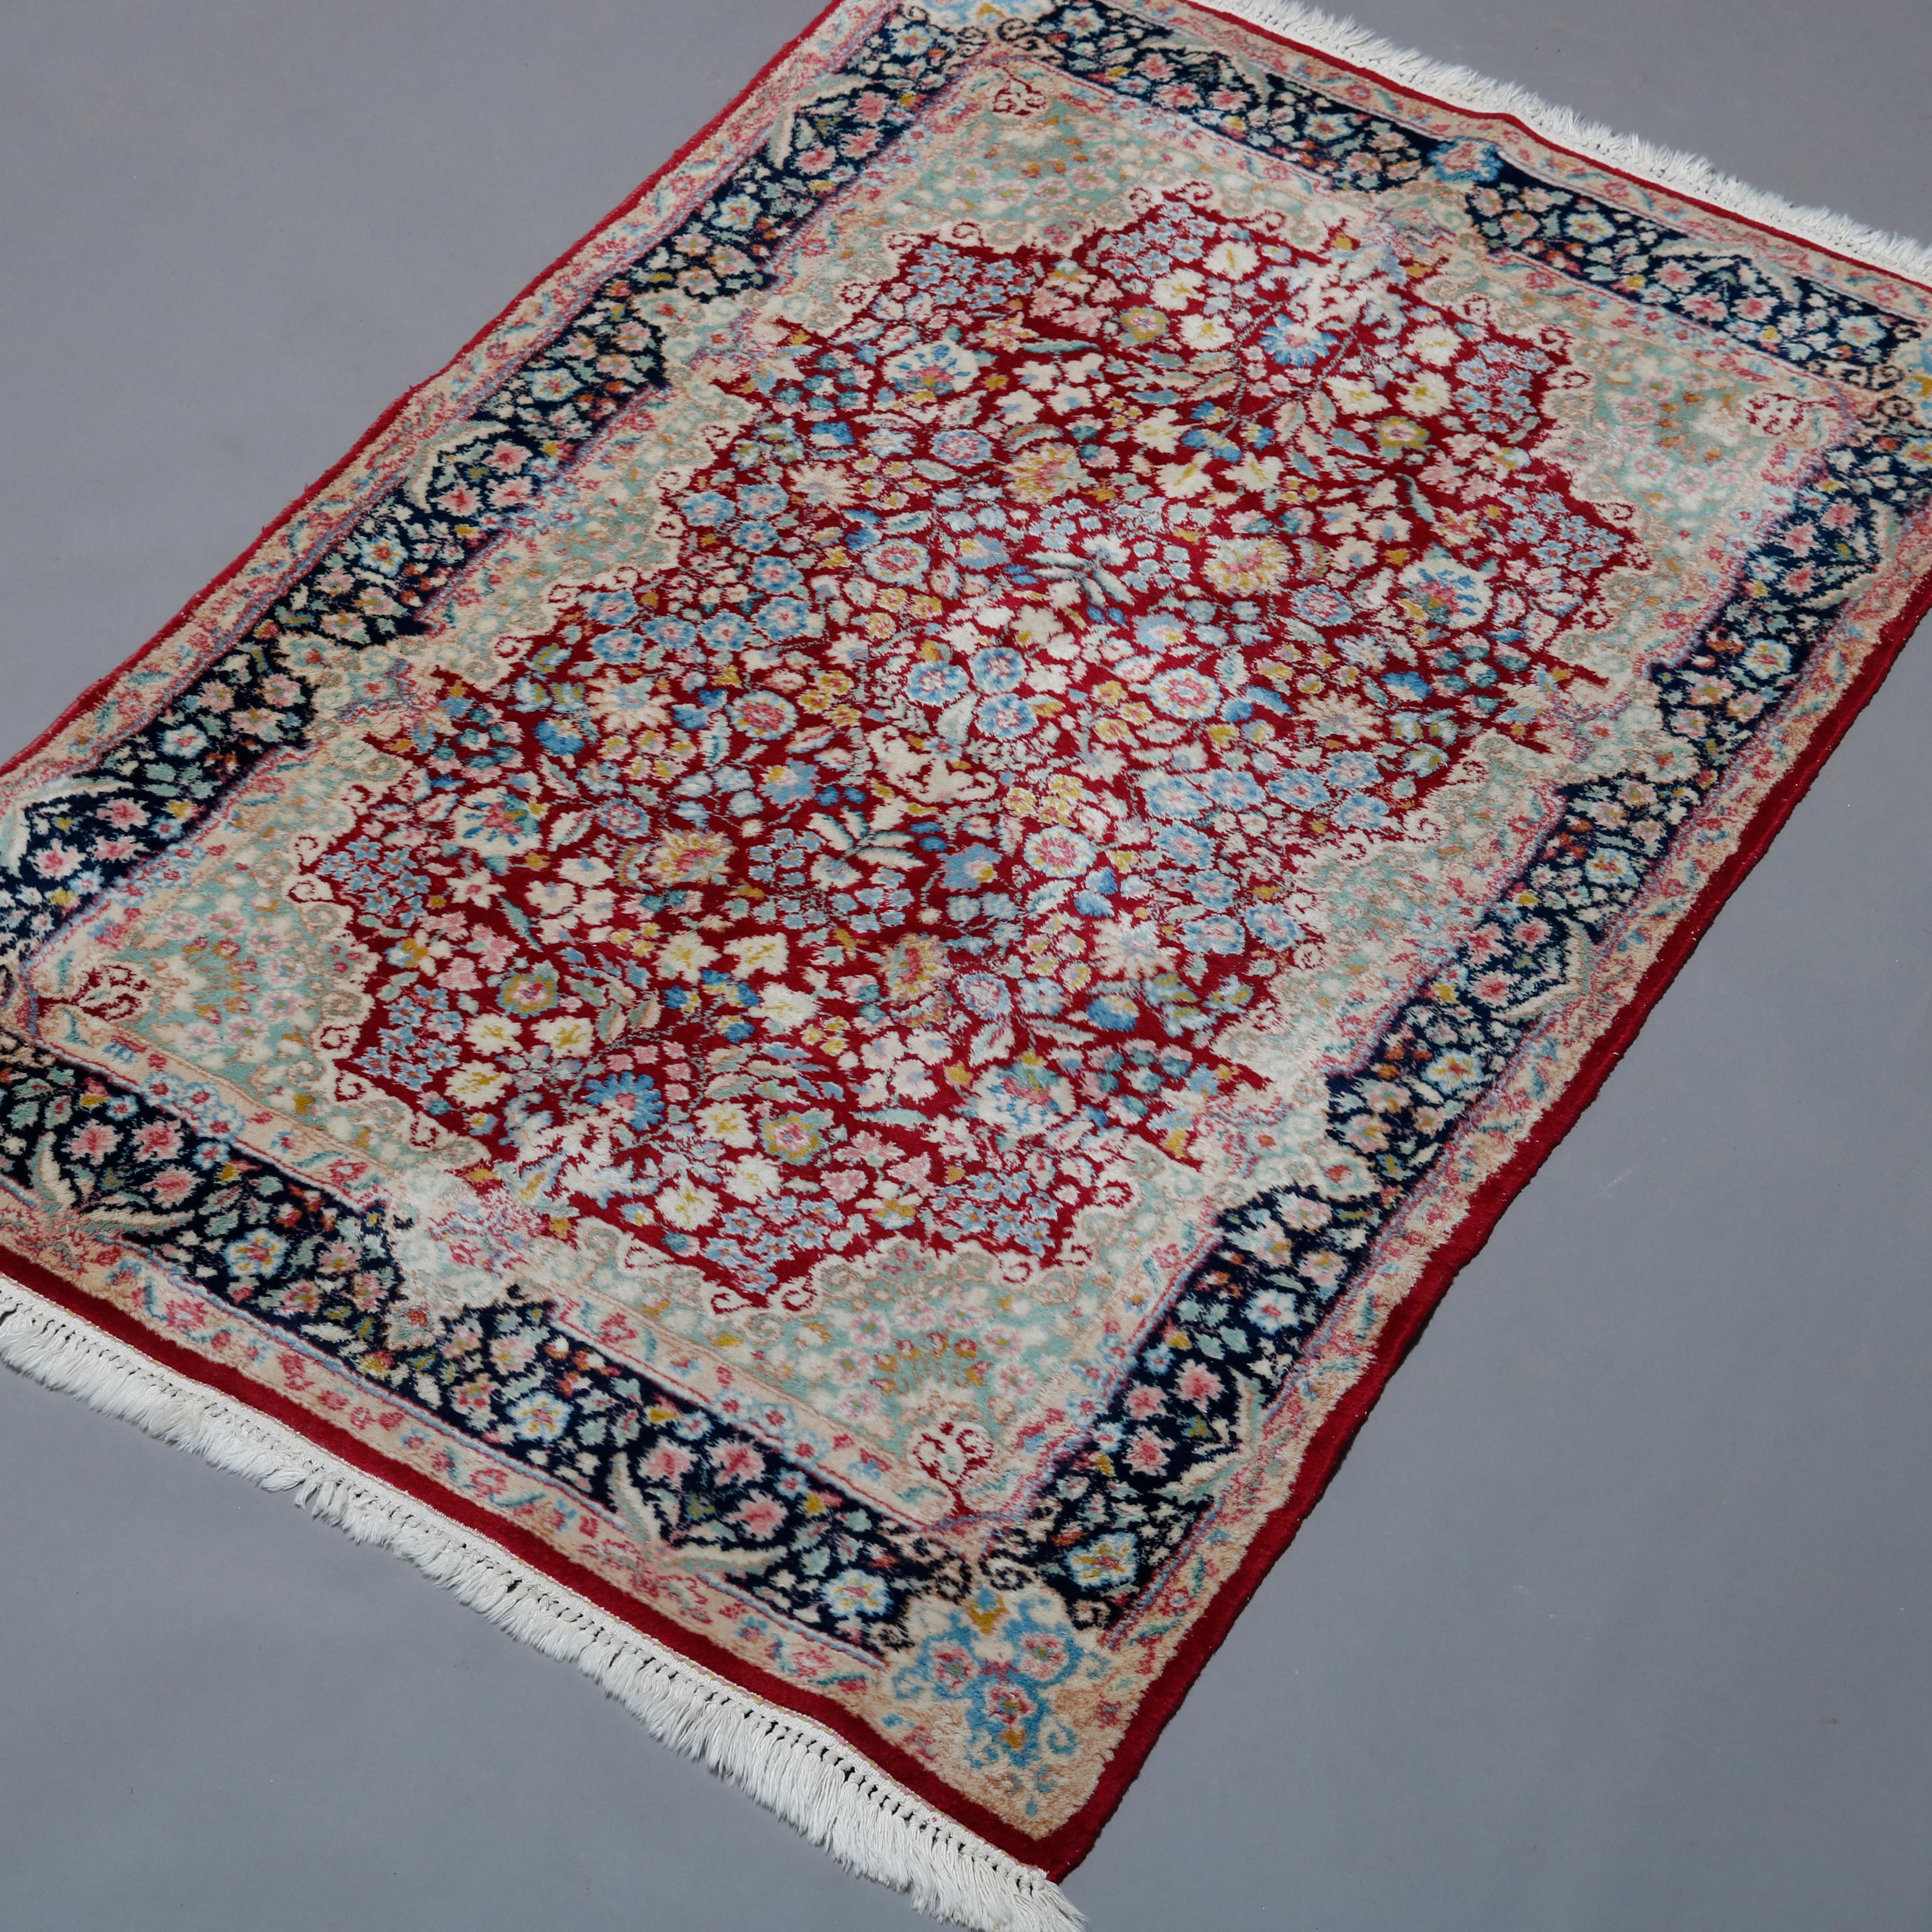 A Persian Kirman oriental rug offers wool construction with all-over floral and foliate design on red ground having elaborate shaped border, circa 1940.

Measures: 66.5